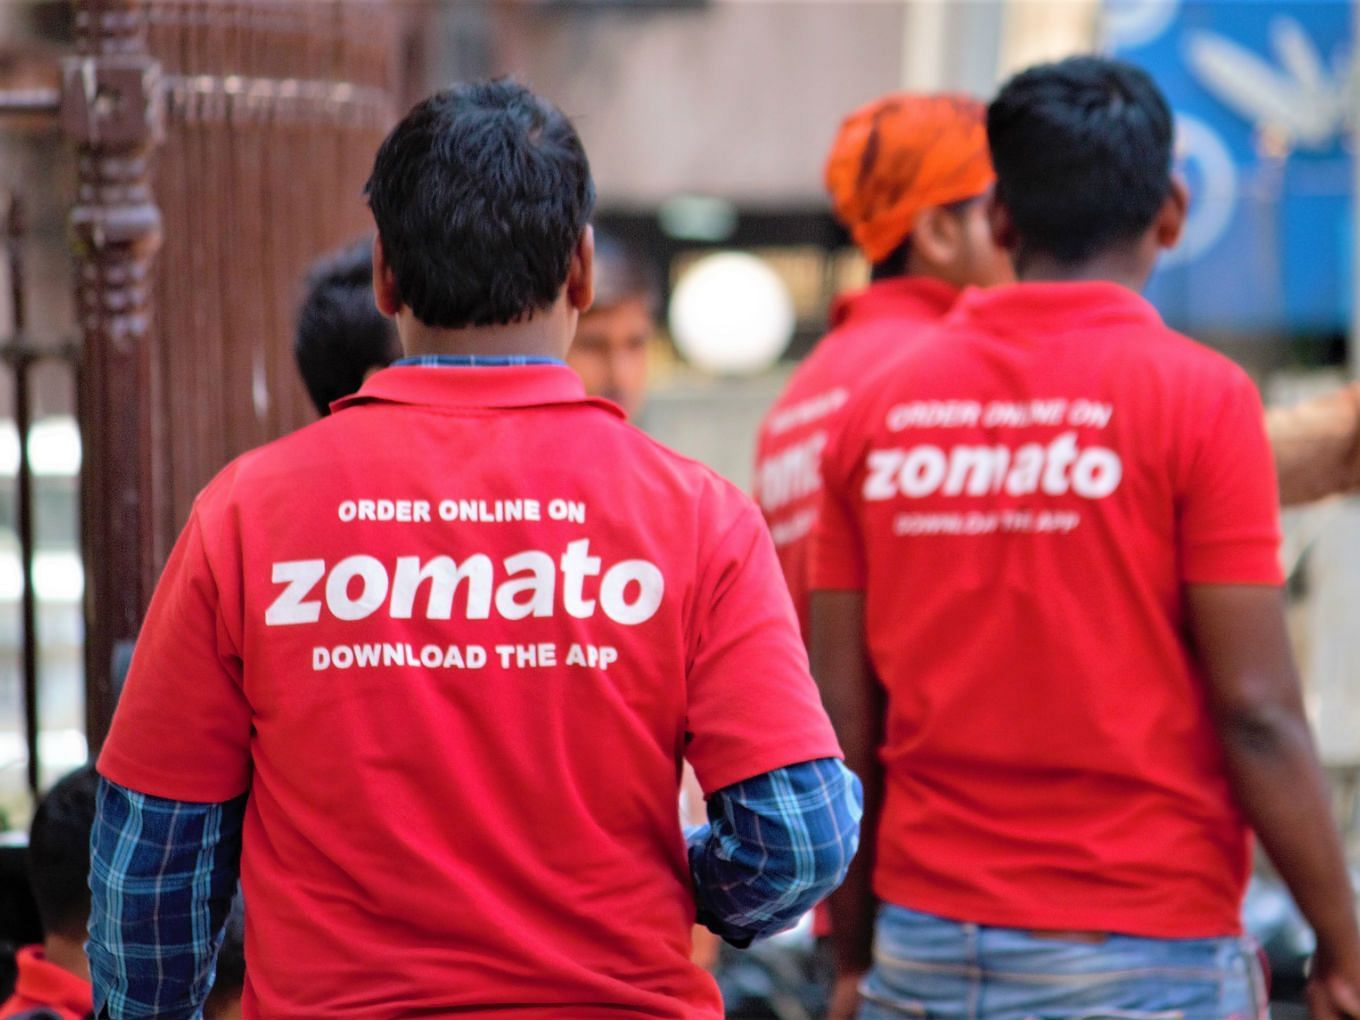 Social media reaction on  zomato craziest question